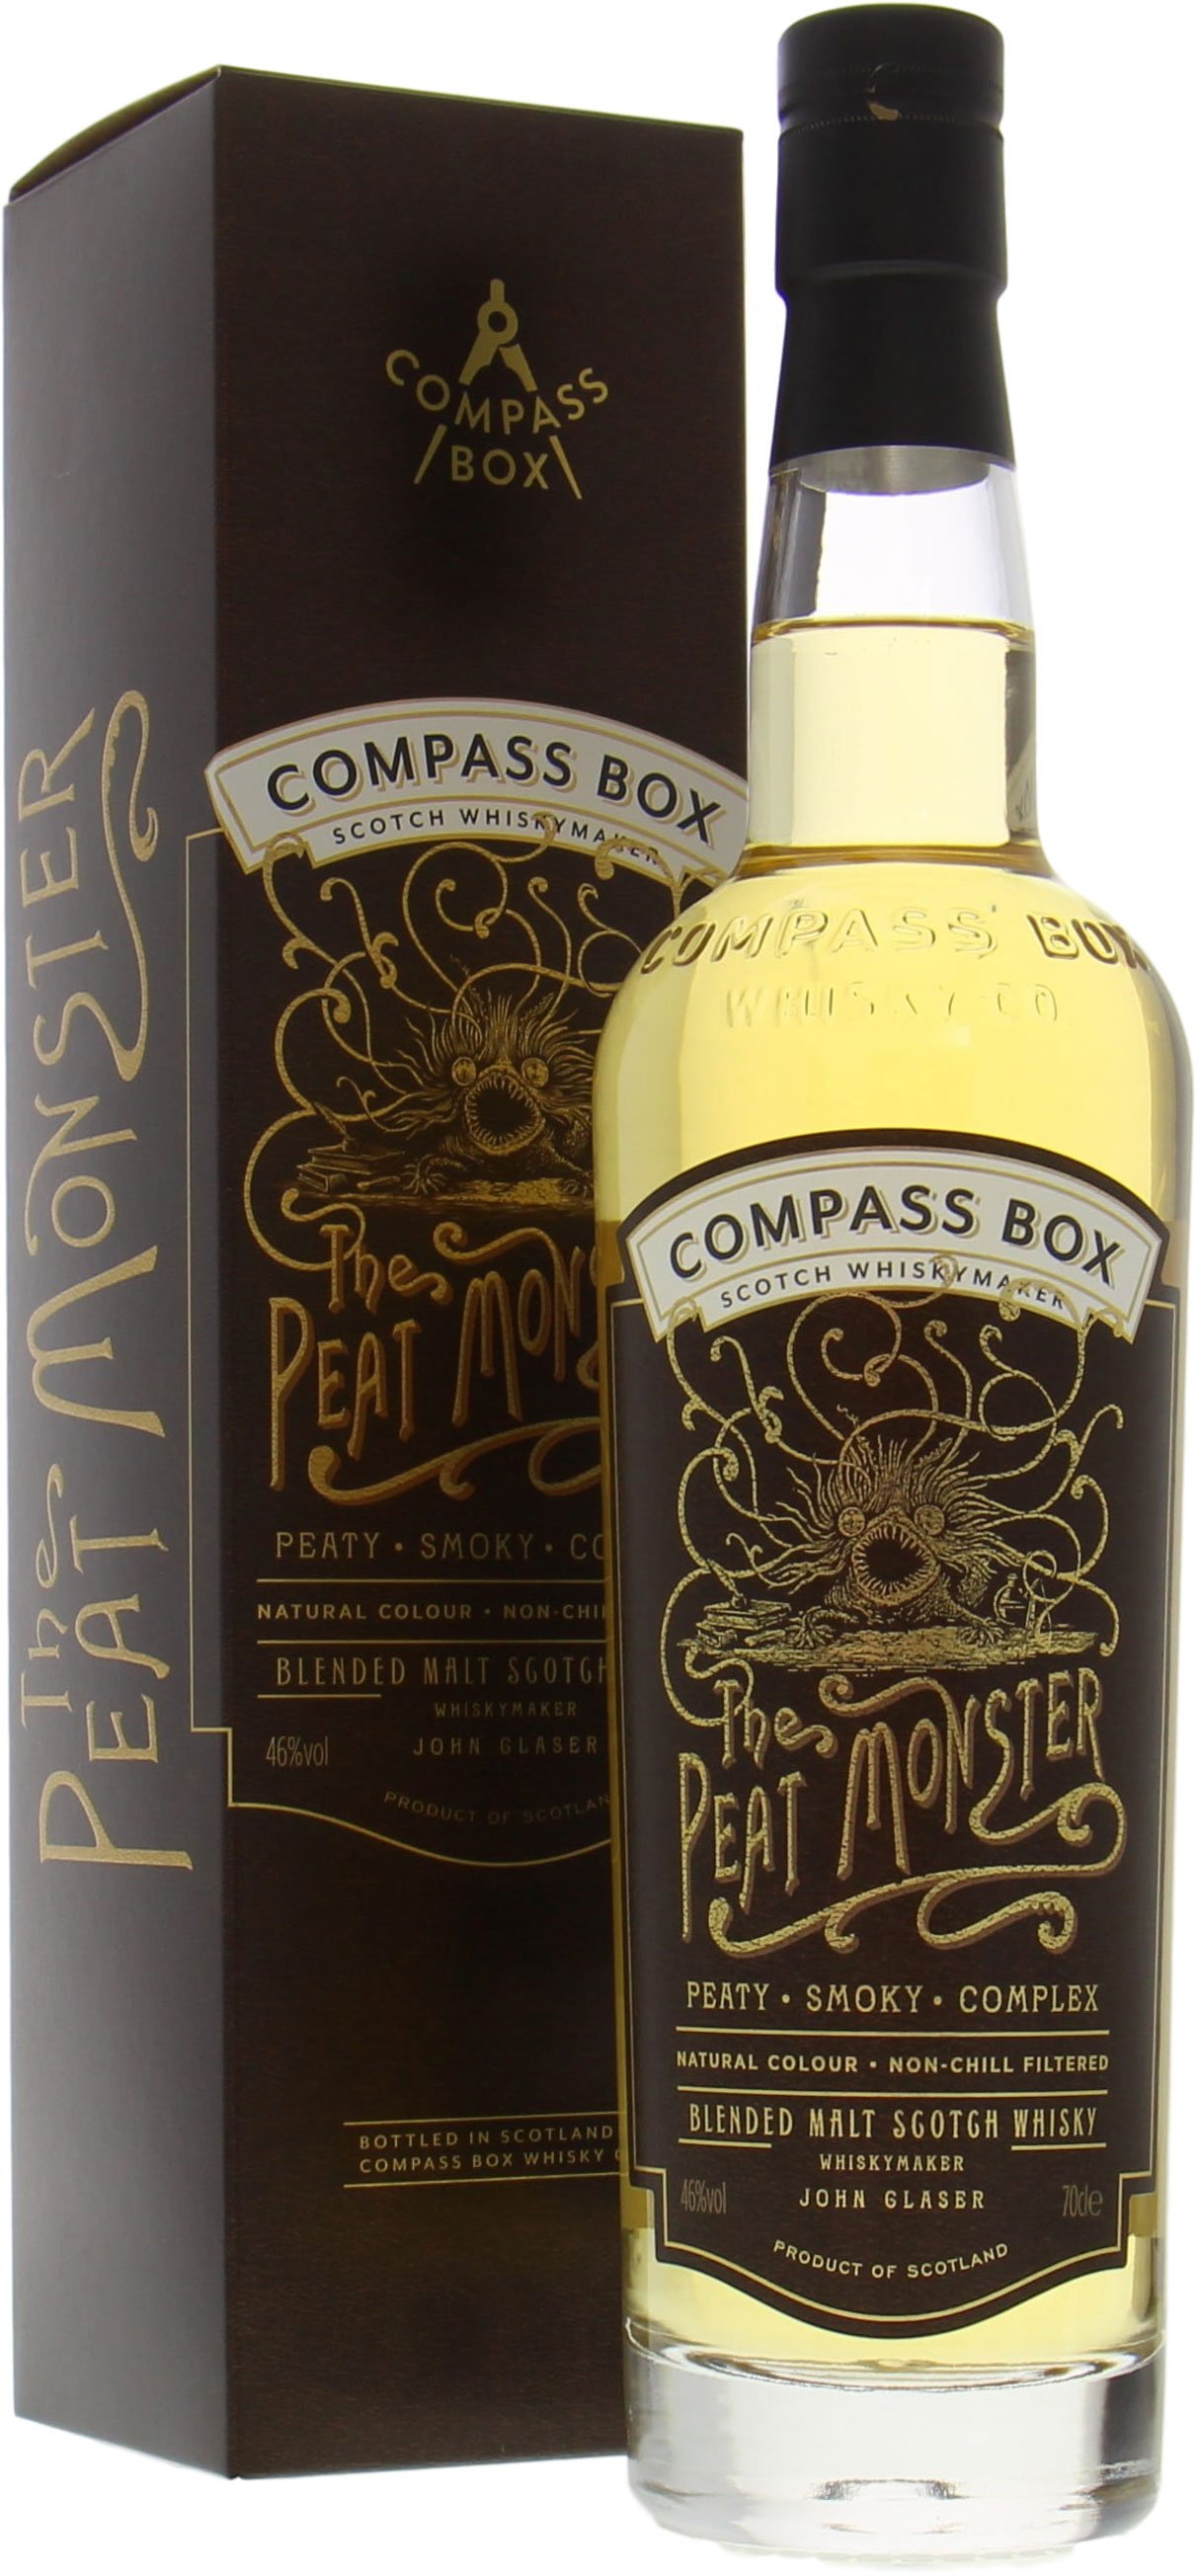 Compass Box - The Peat Monster The Signature Range 46% NV In Original Container